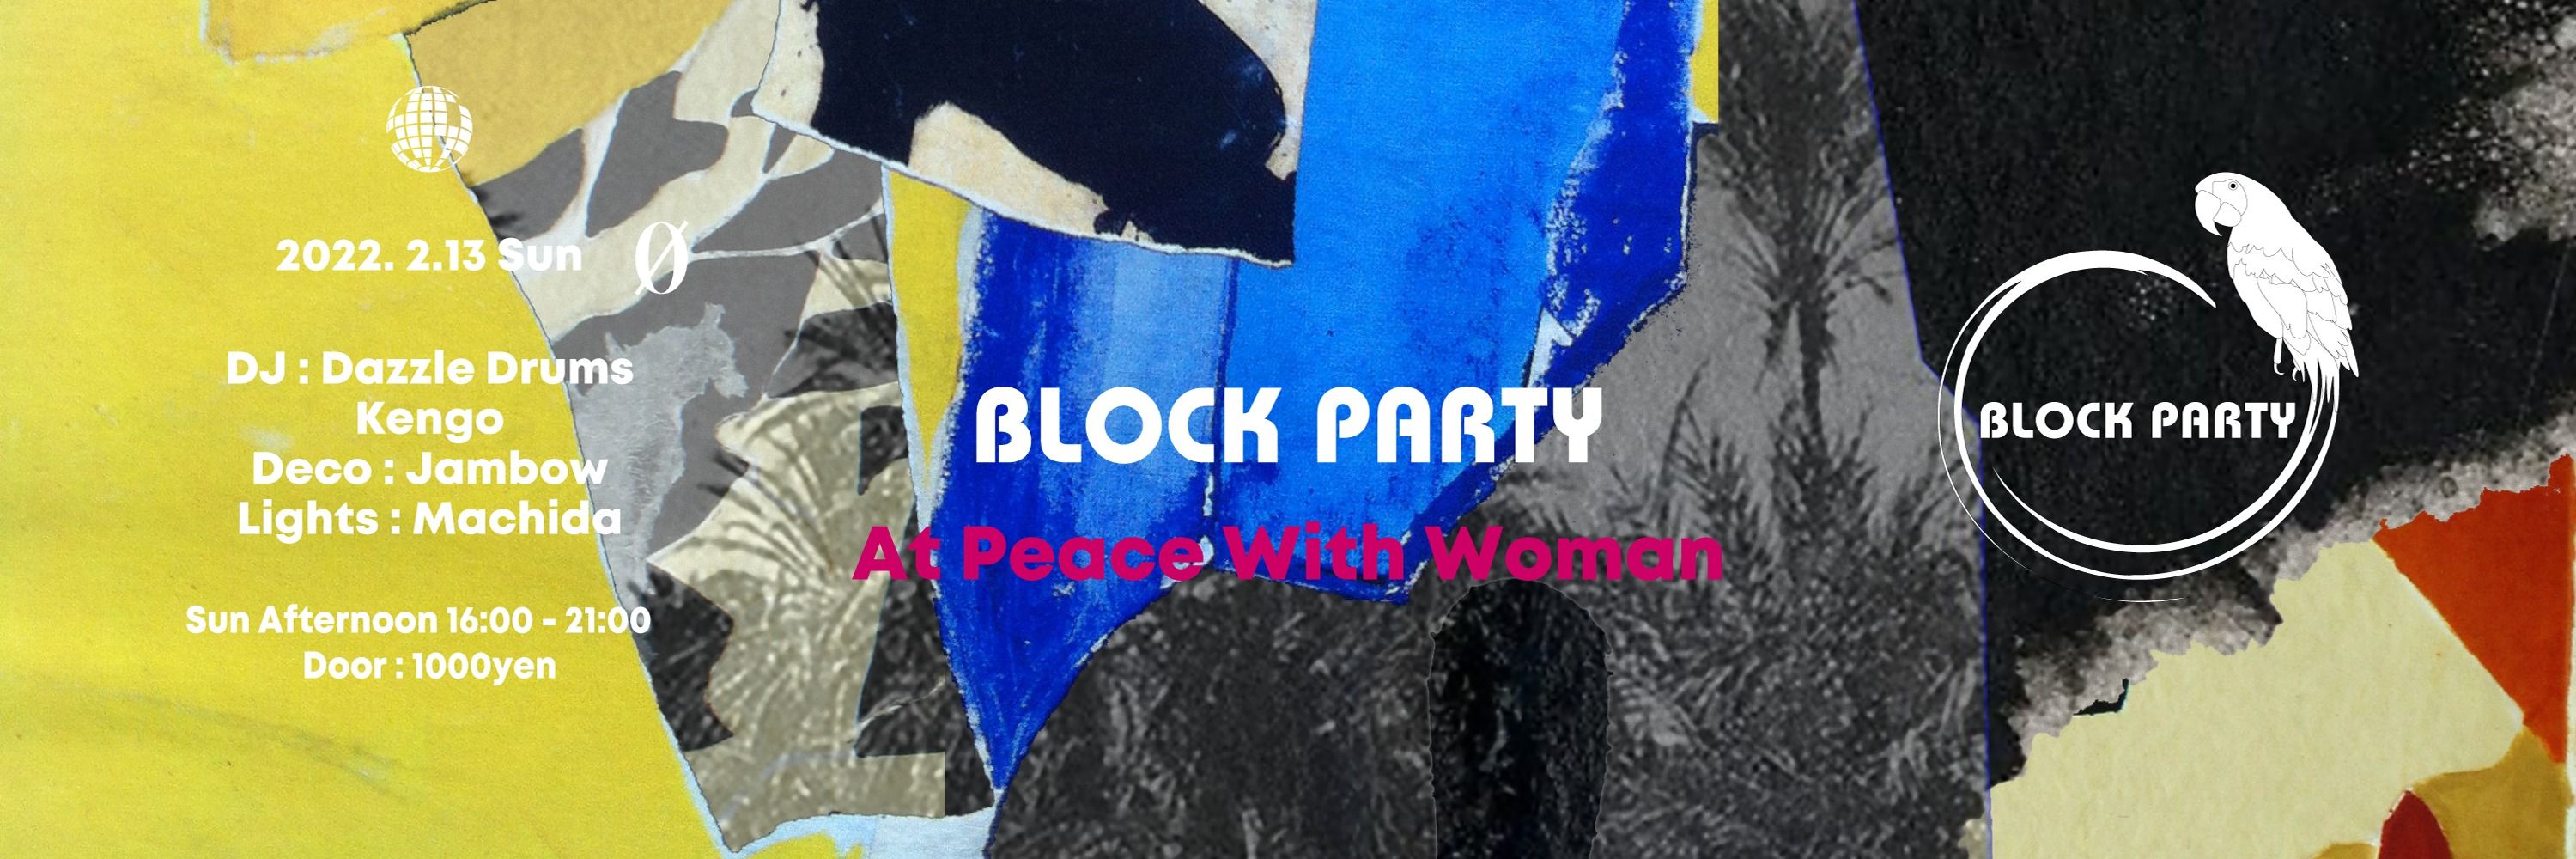 Block Party "At Peace With Woman"